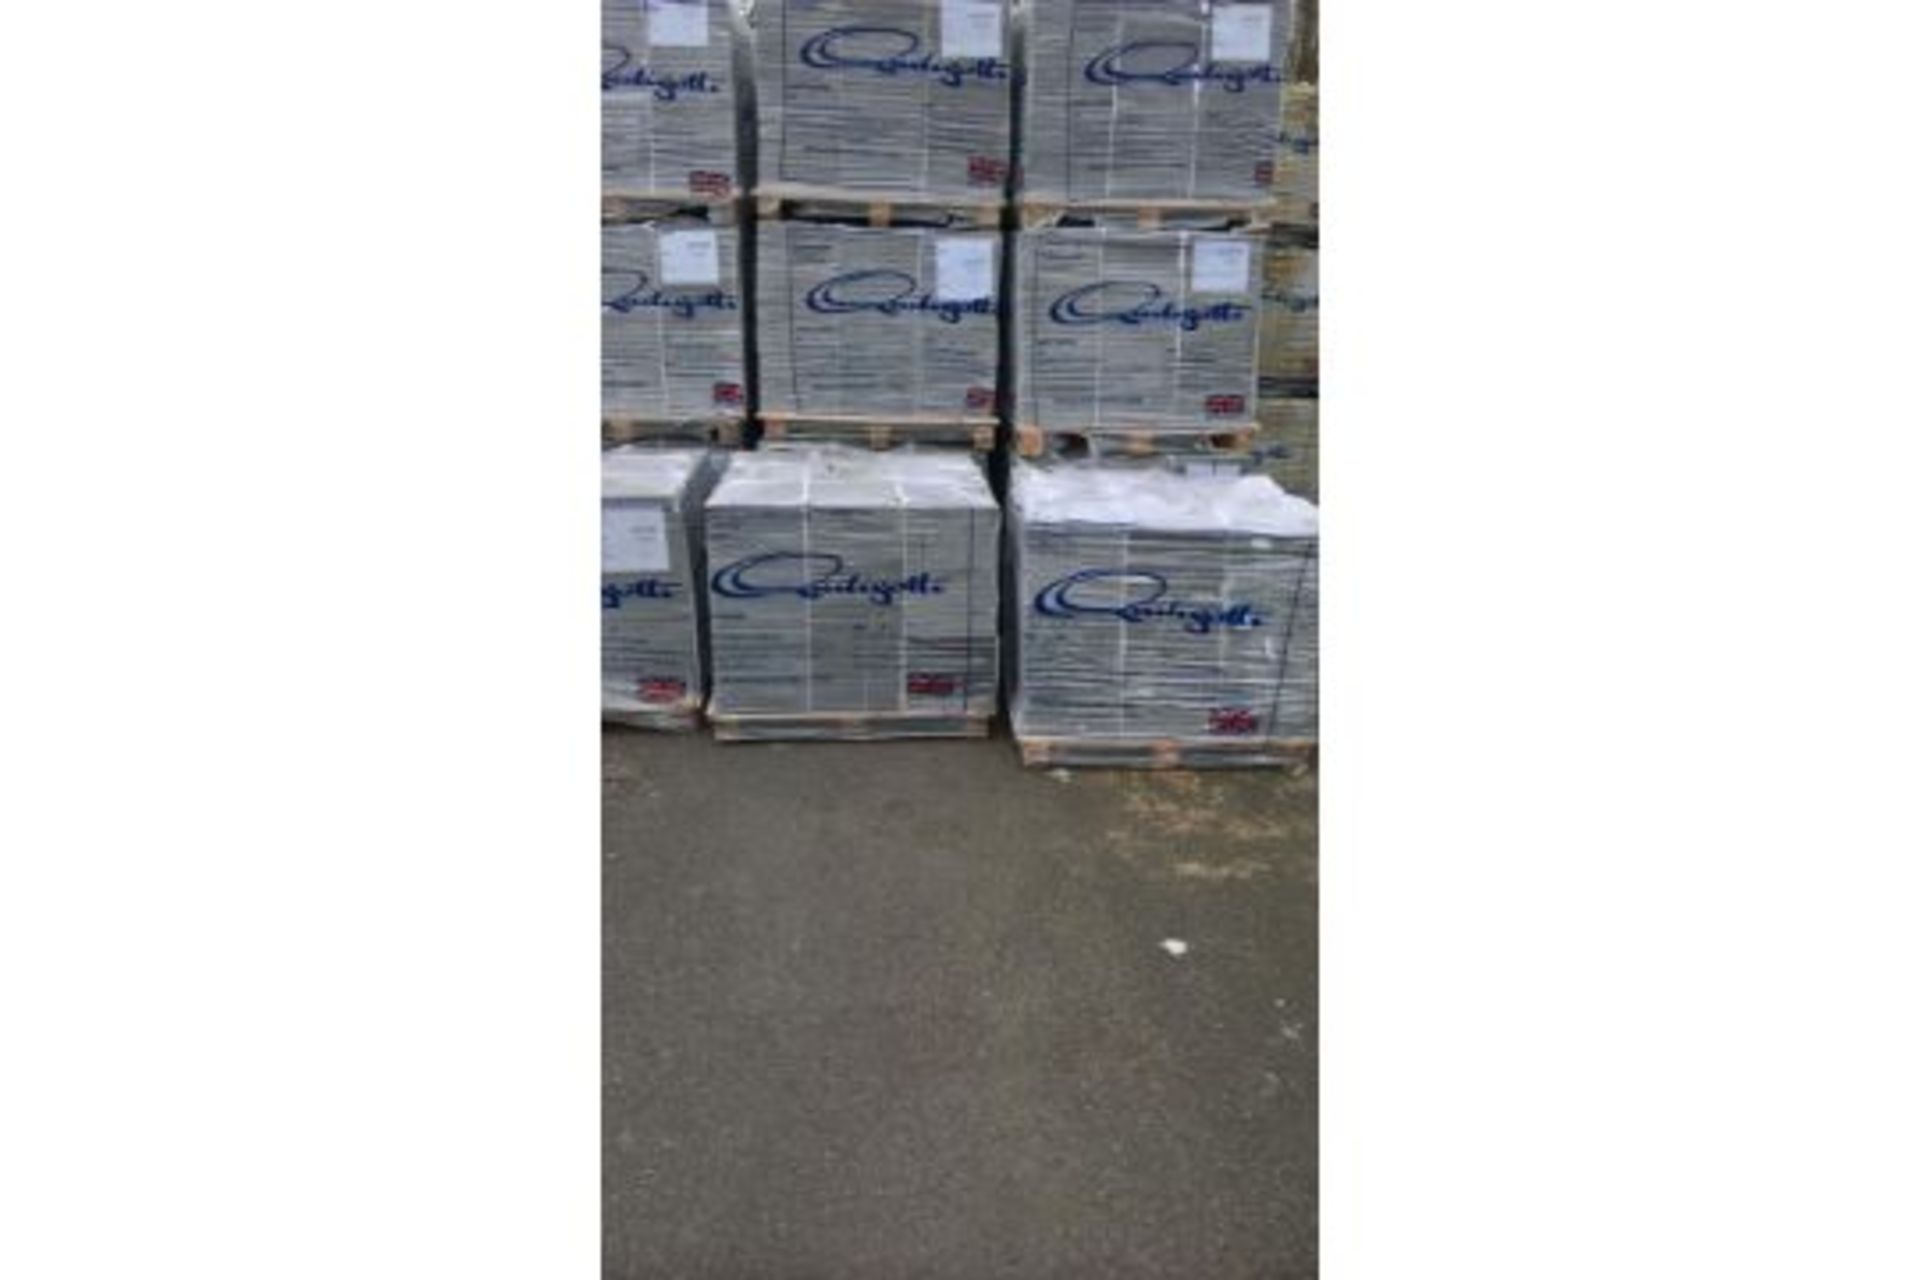 1 PALLET OF BRAND NEW GREY TERRAZZO COMMERCIAL TILES Z30099, COVERS 24 SQUARE YARDS *PLUS VAT* - Image 3 of 3